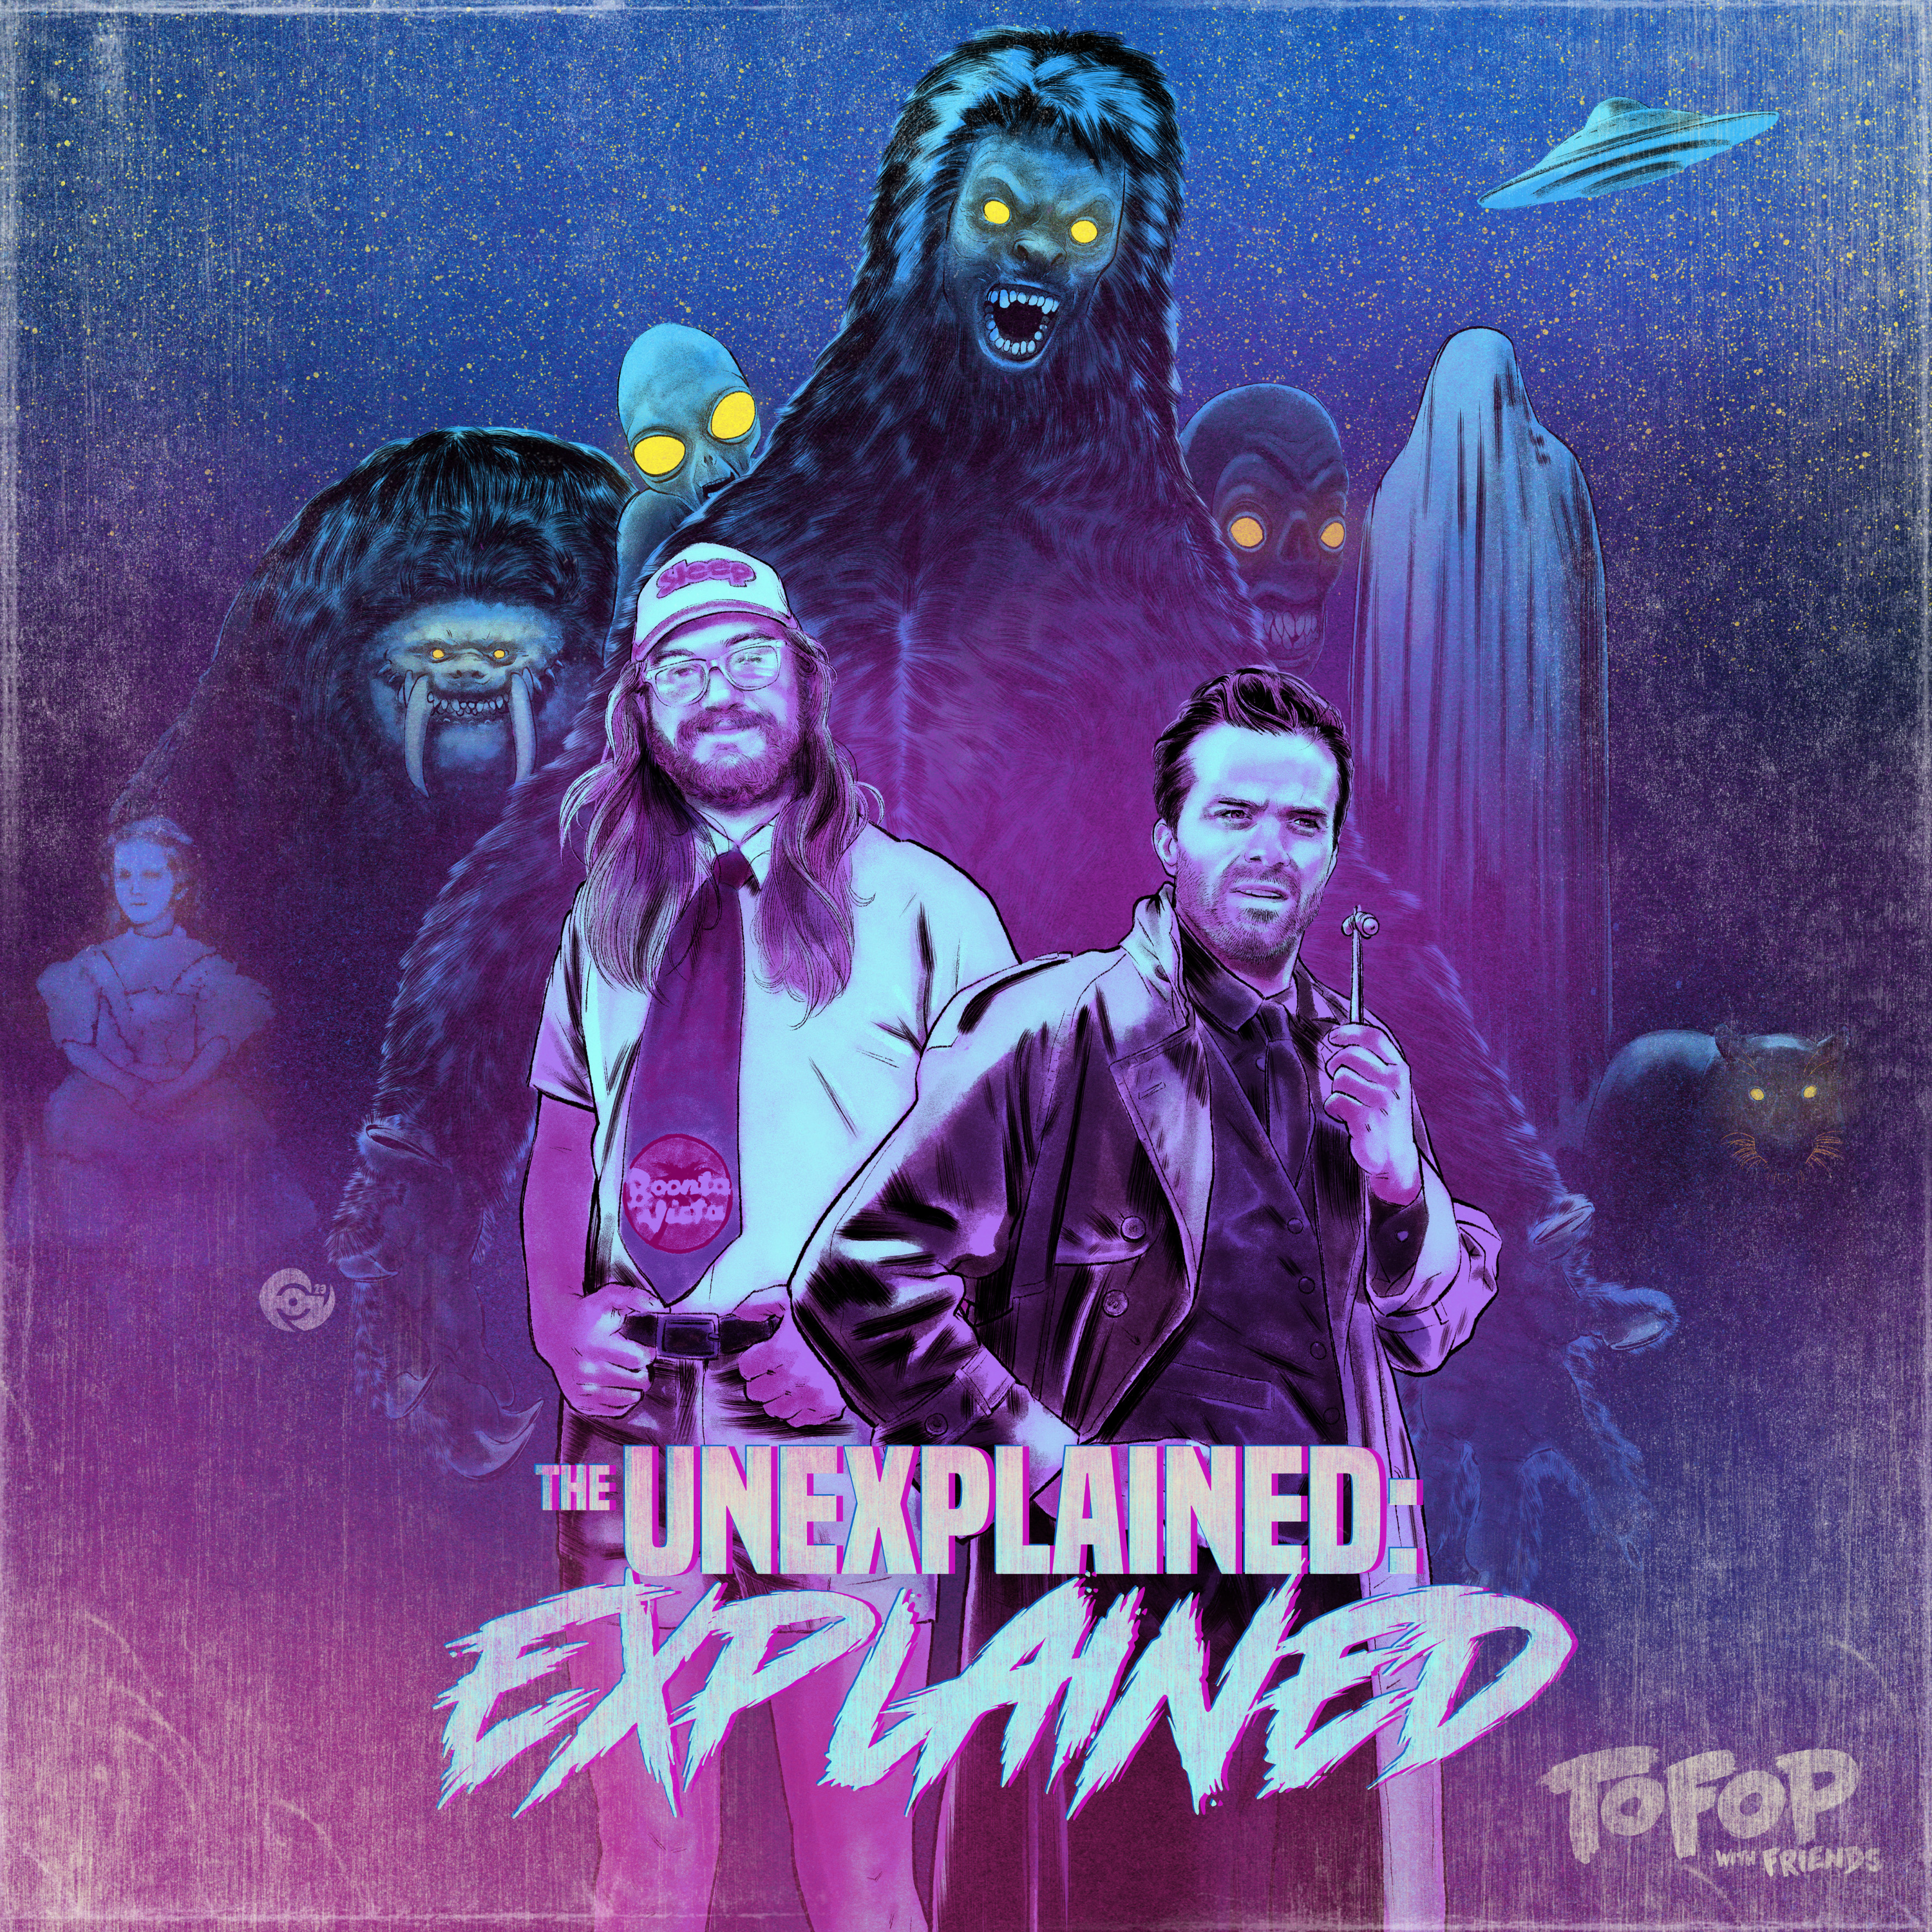 The Unexplained: Explained - Return to Humpty Doo with Paul Cropper